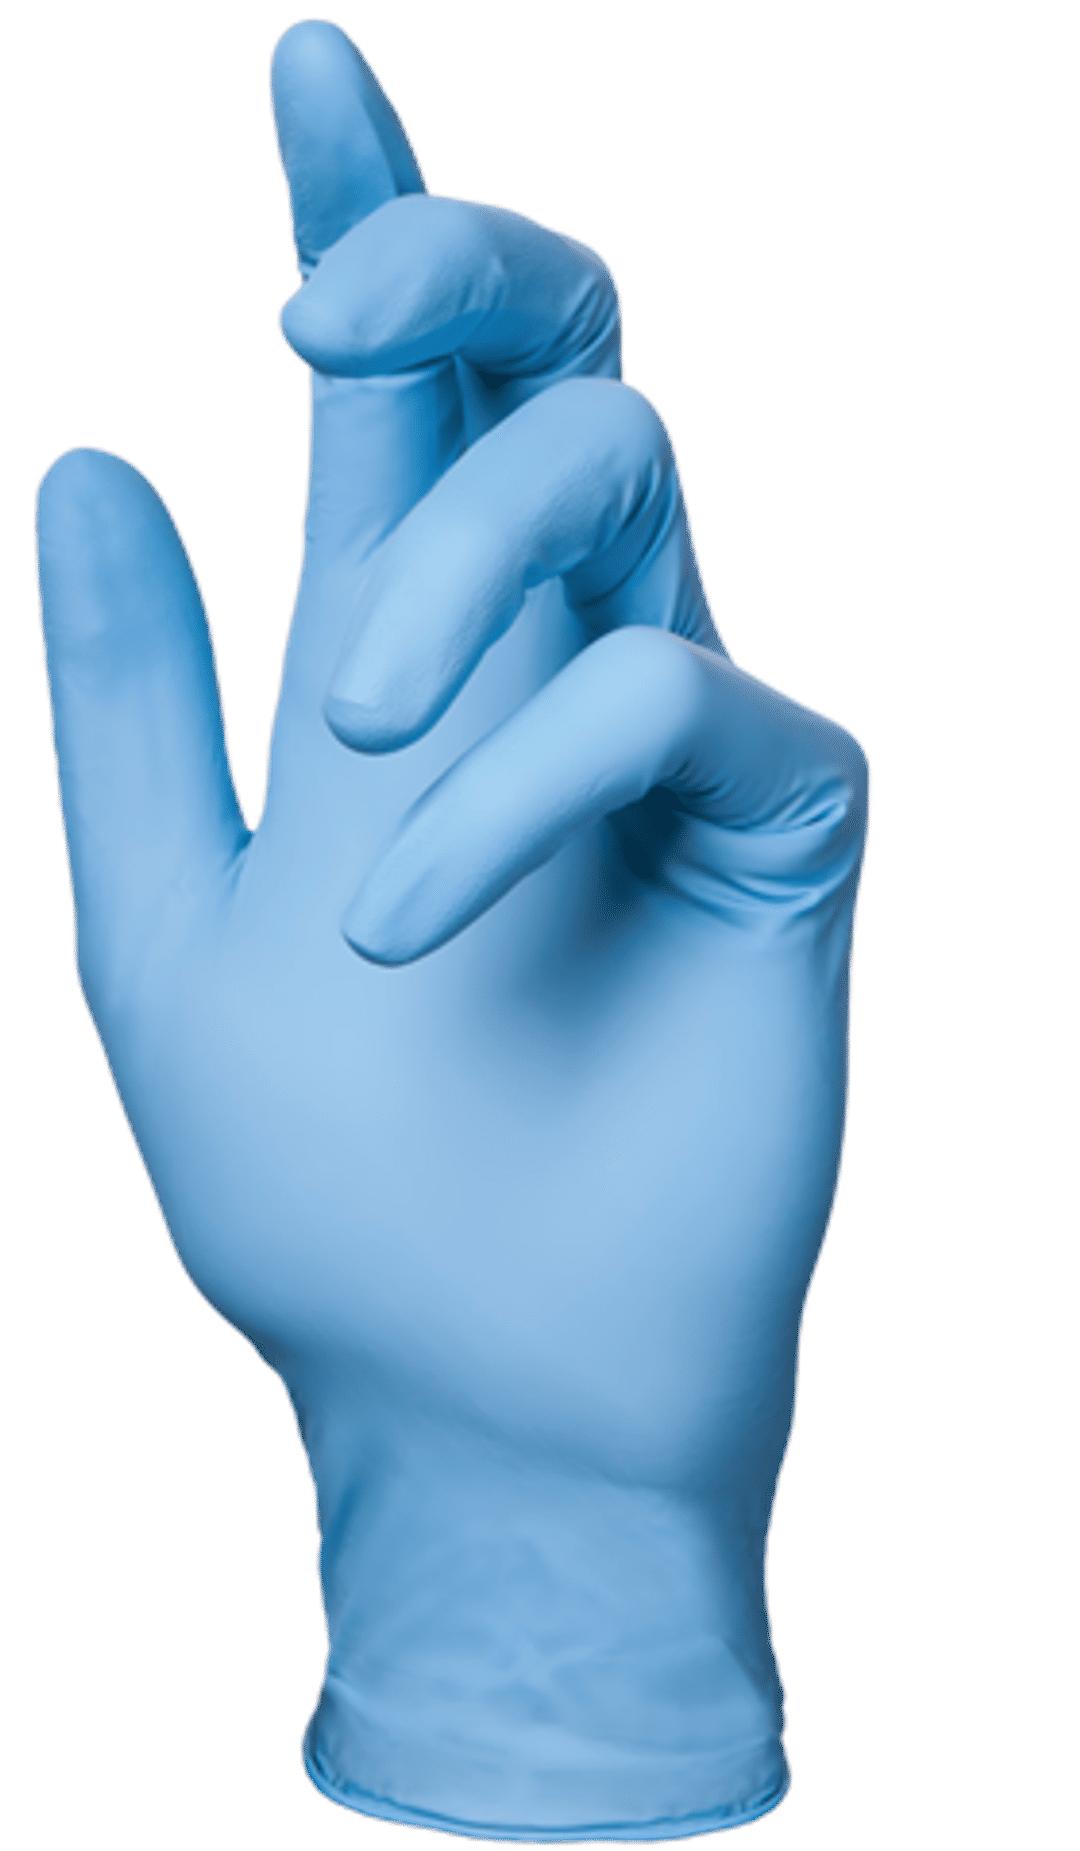 Bromed Nitrile Gloves Small Pack of 100